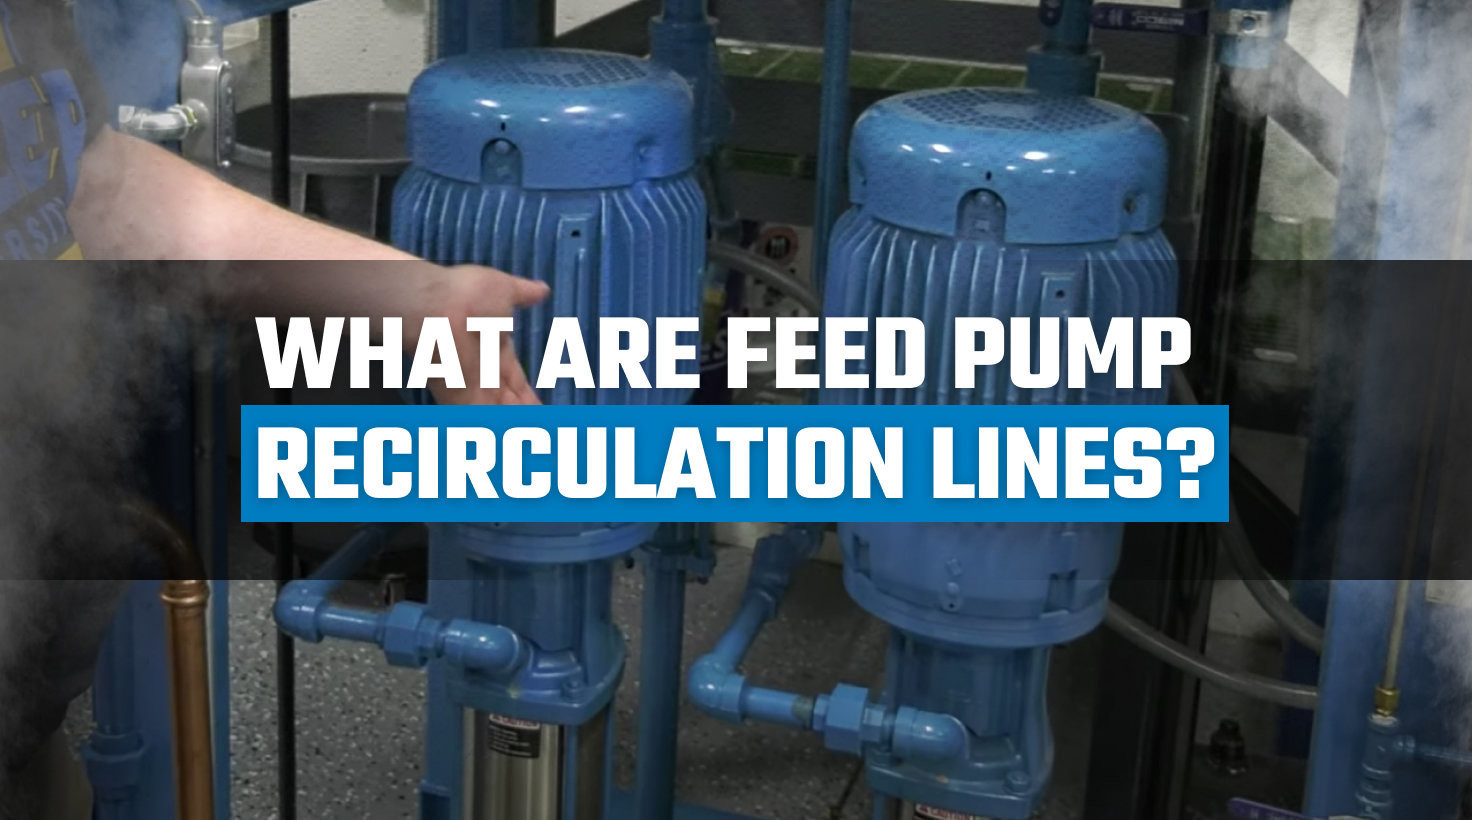 What Are Feed Pump Recirculation Lines?